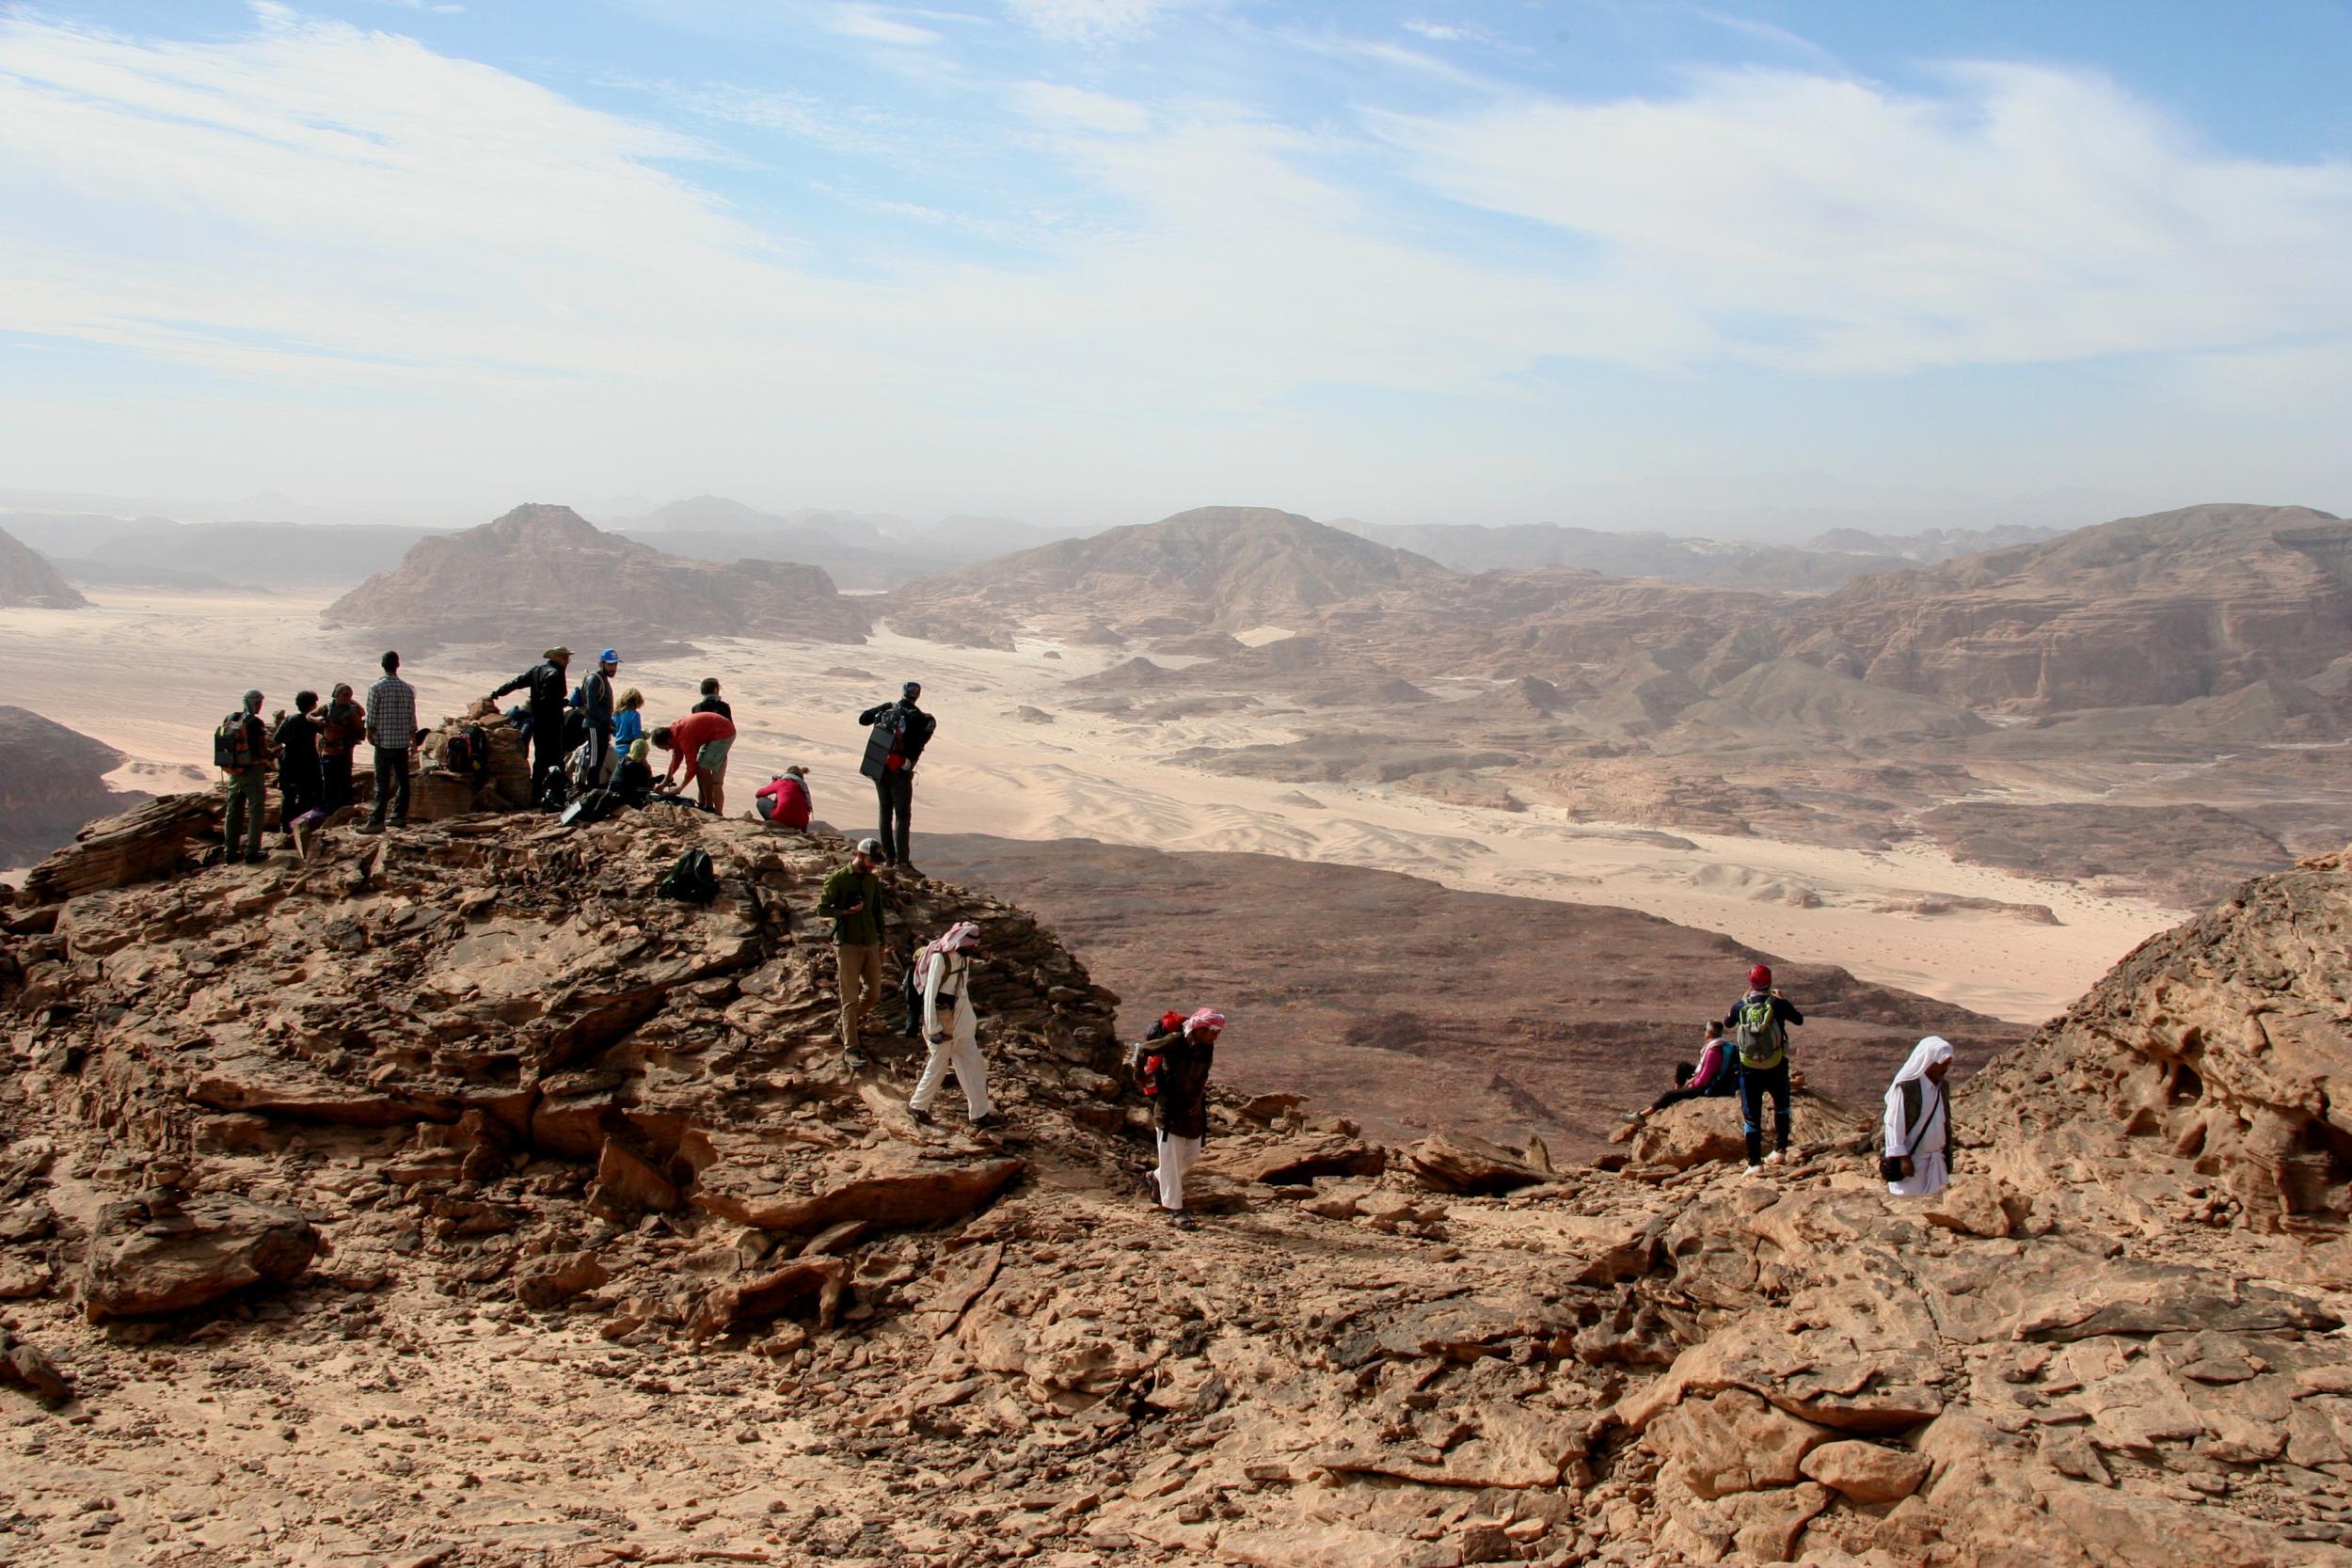 The initial summit of Jebel Milehis